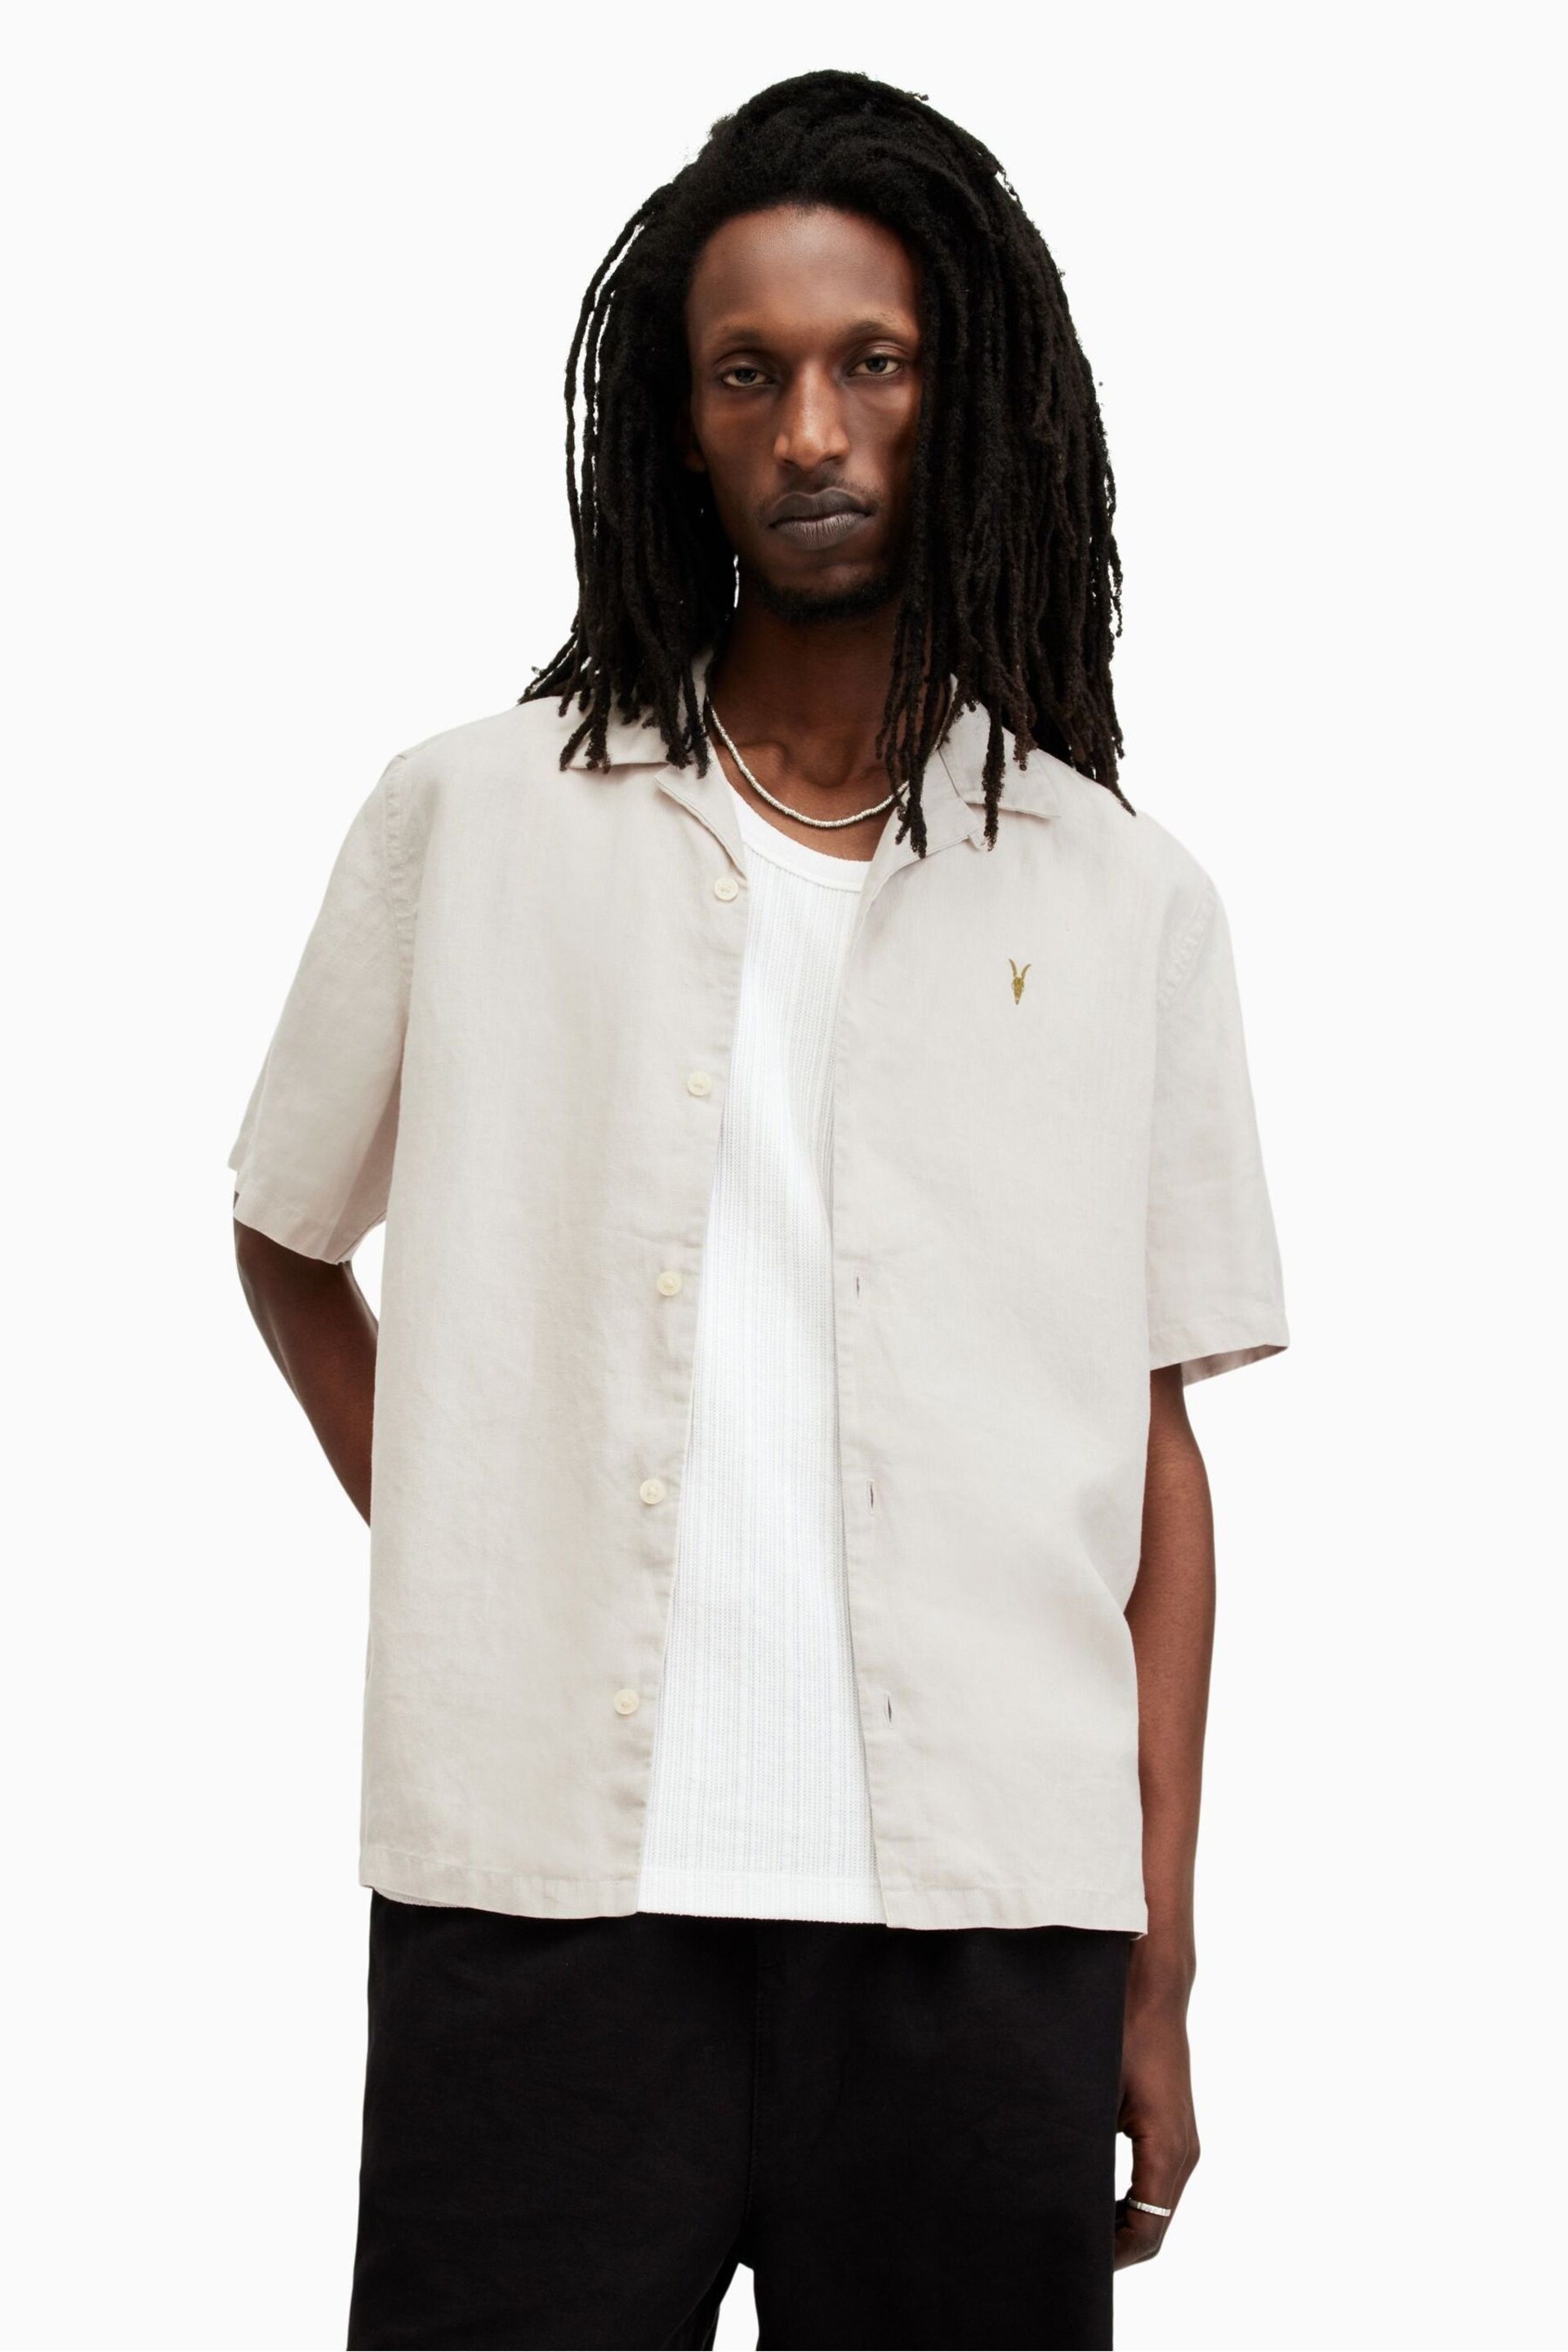 AllSaints Nude Audley Short Sleeve Shirt - Image 1 of 6